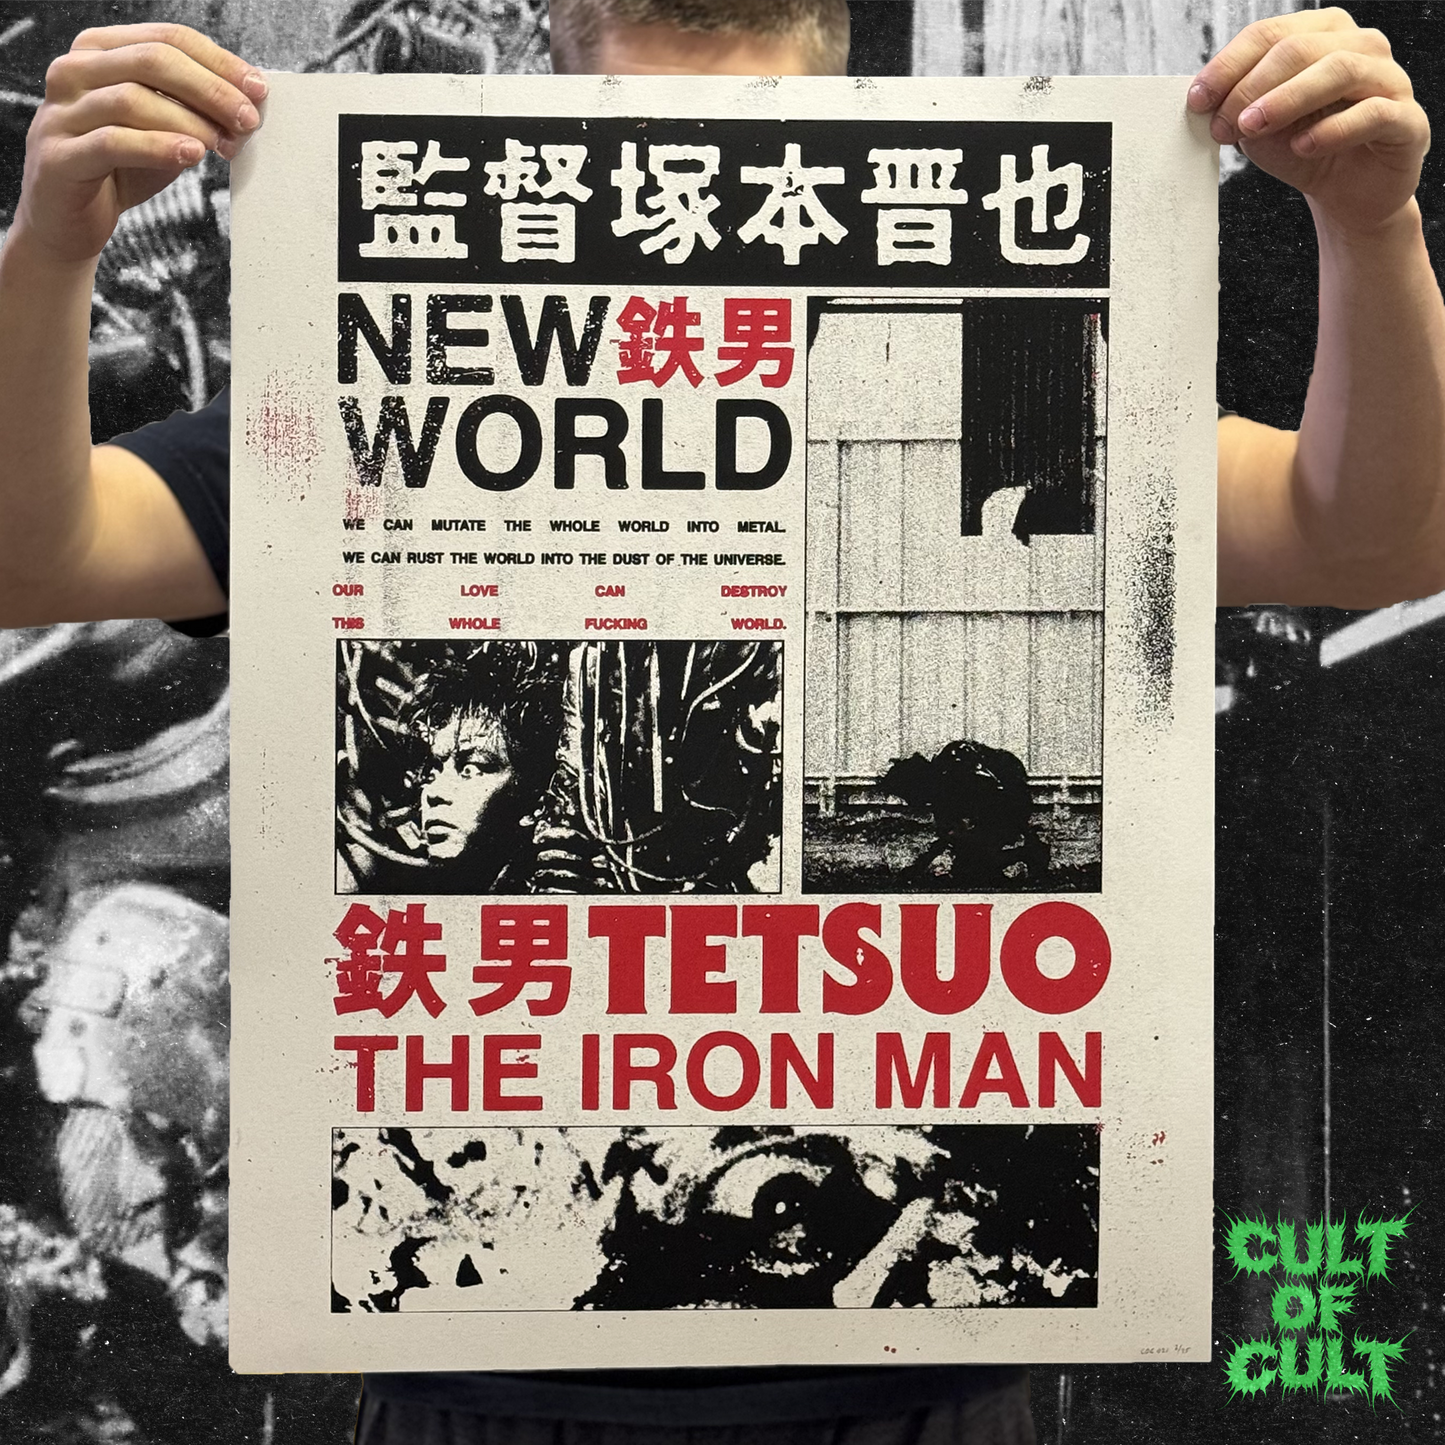 Construction Gray Tetsuo poster being held up